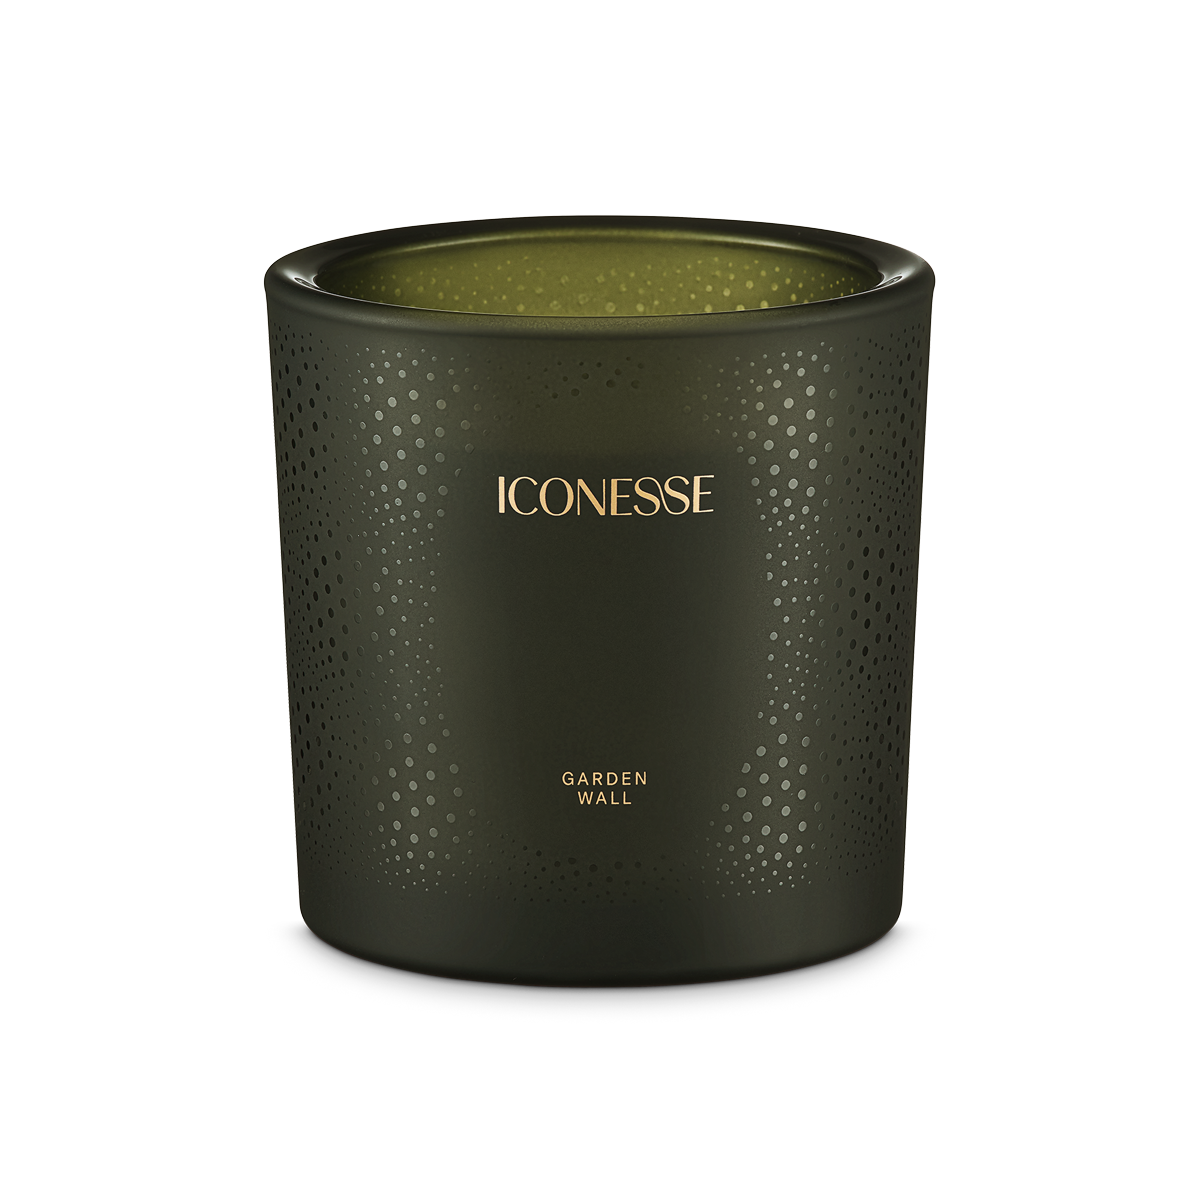 Garden Wall Scented Candle